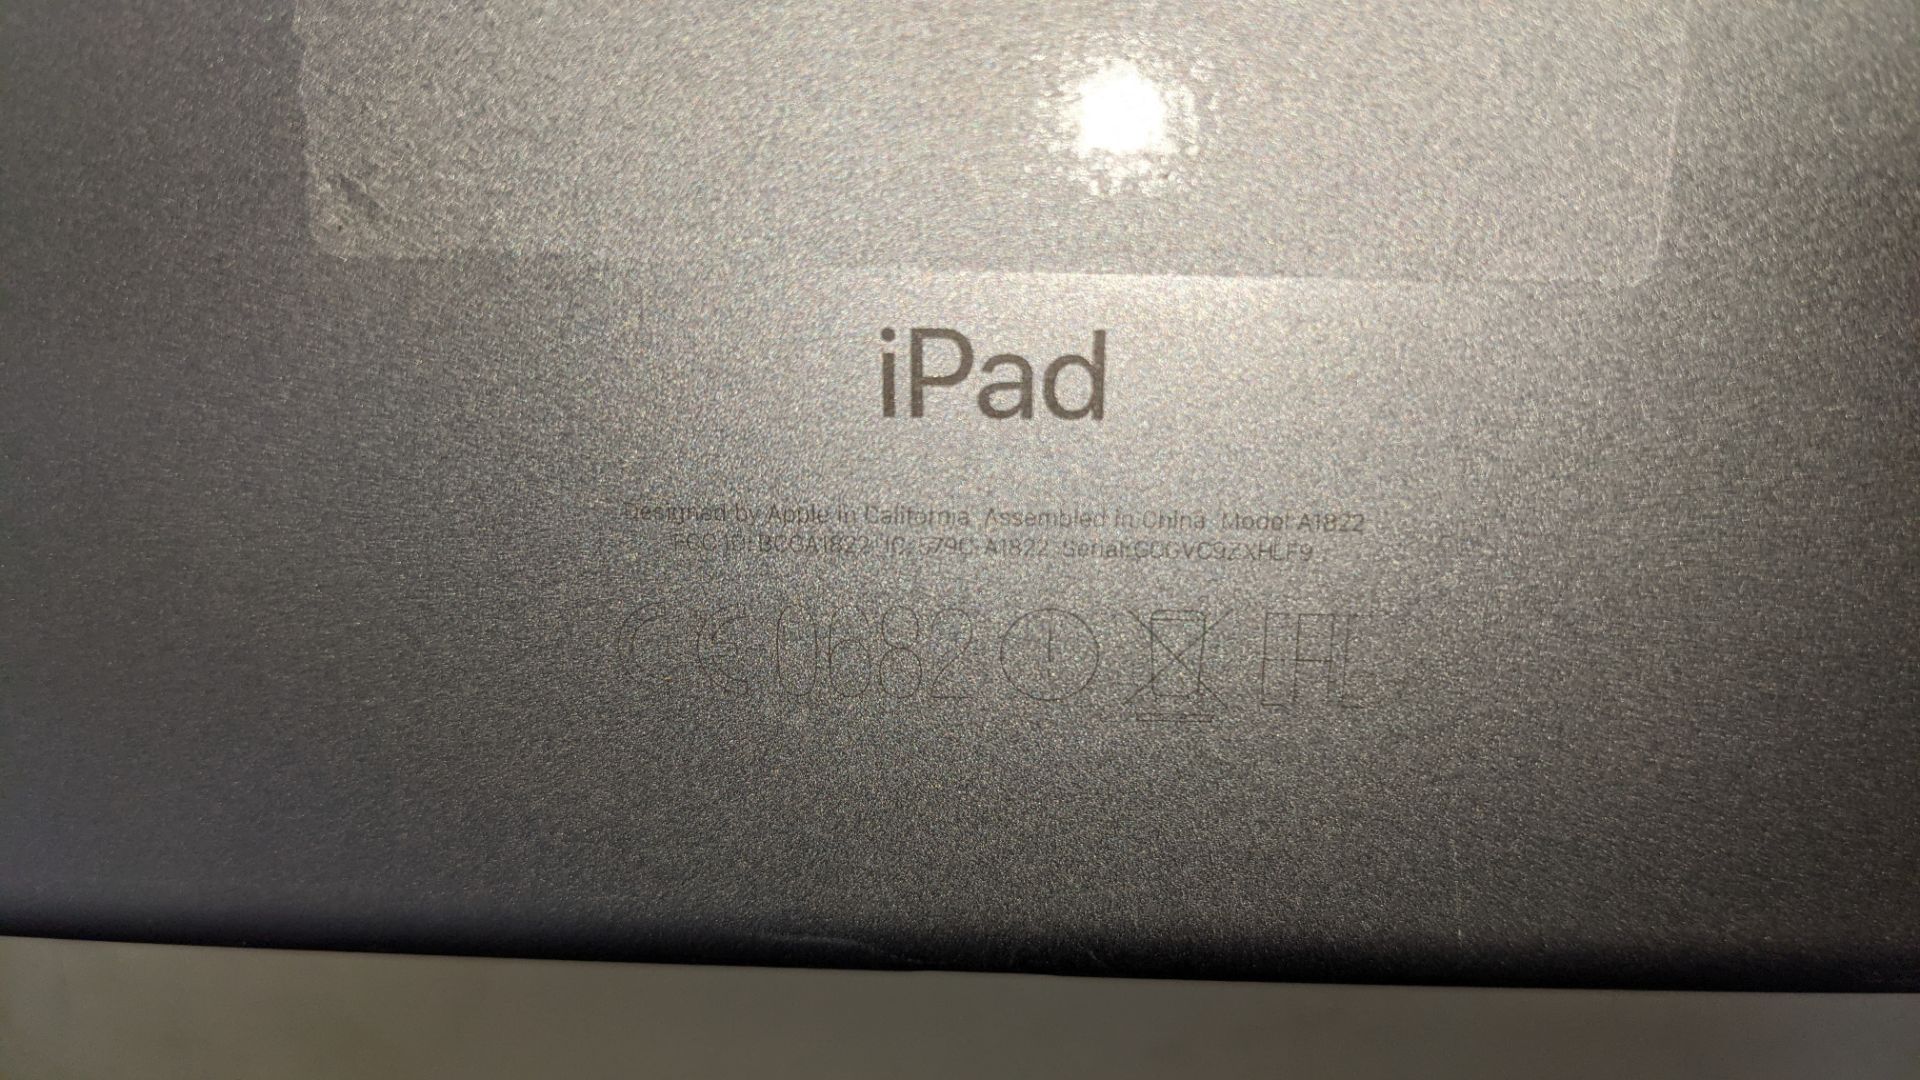 Apple iPad (space grey) 5th generation 32Gb Wi-Fi 9.7" Retina screen. Product code A1822. Apple A9 - Image 12 of 14